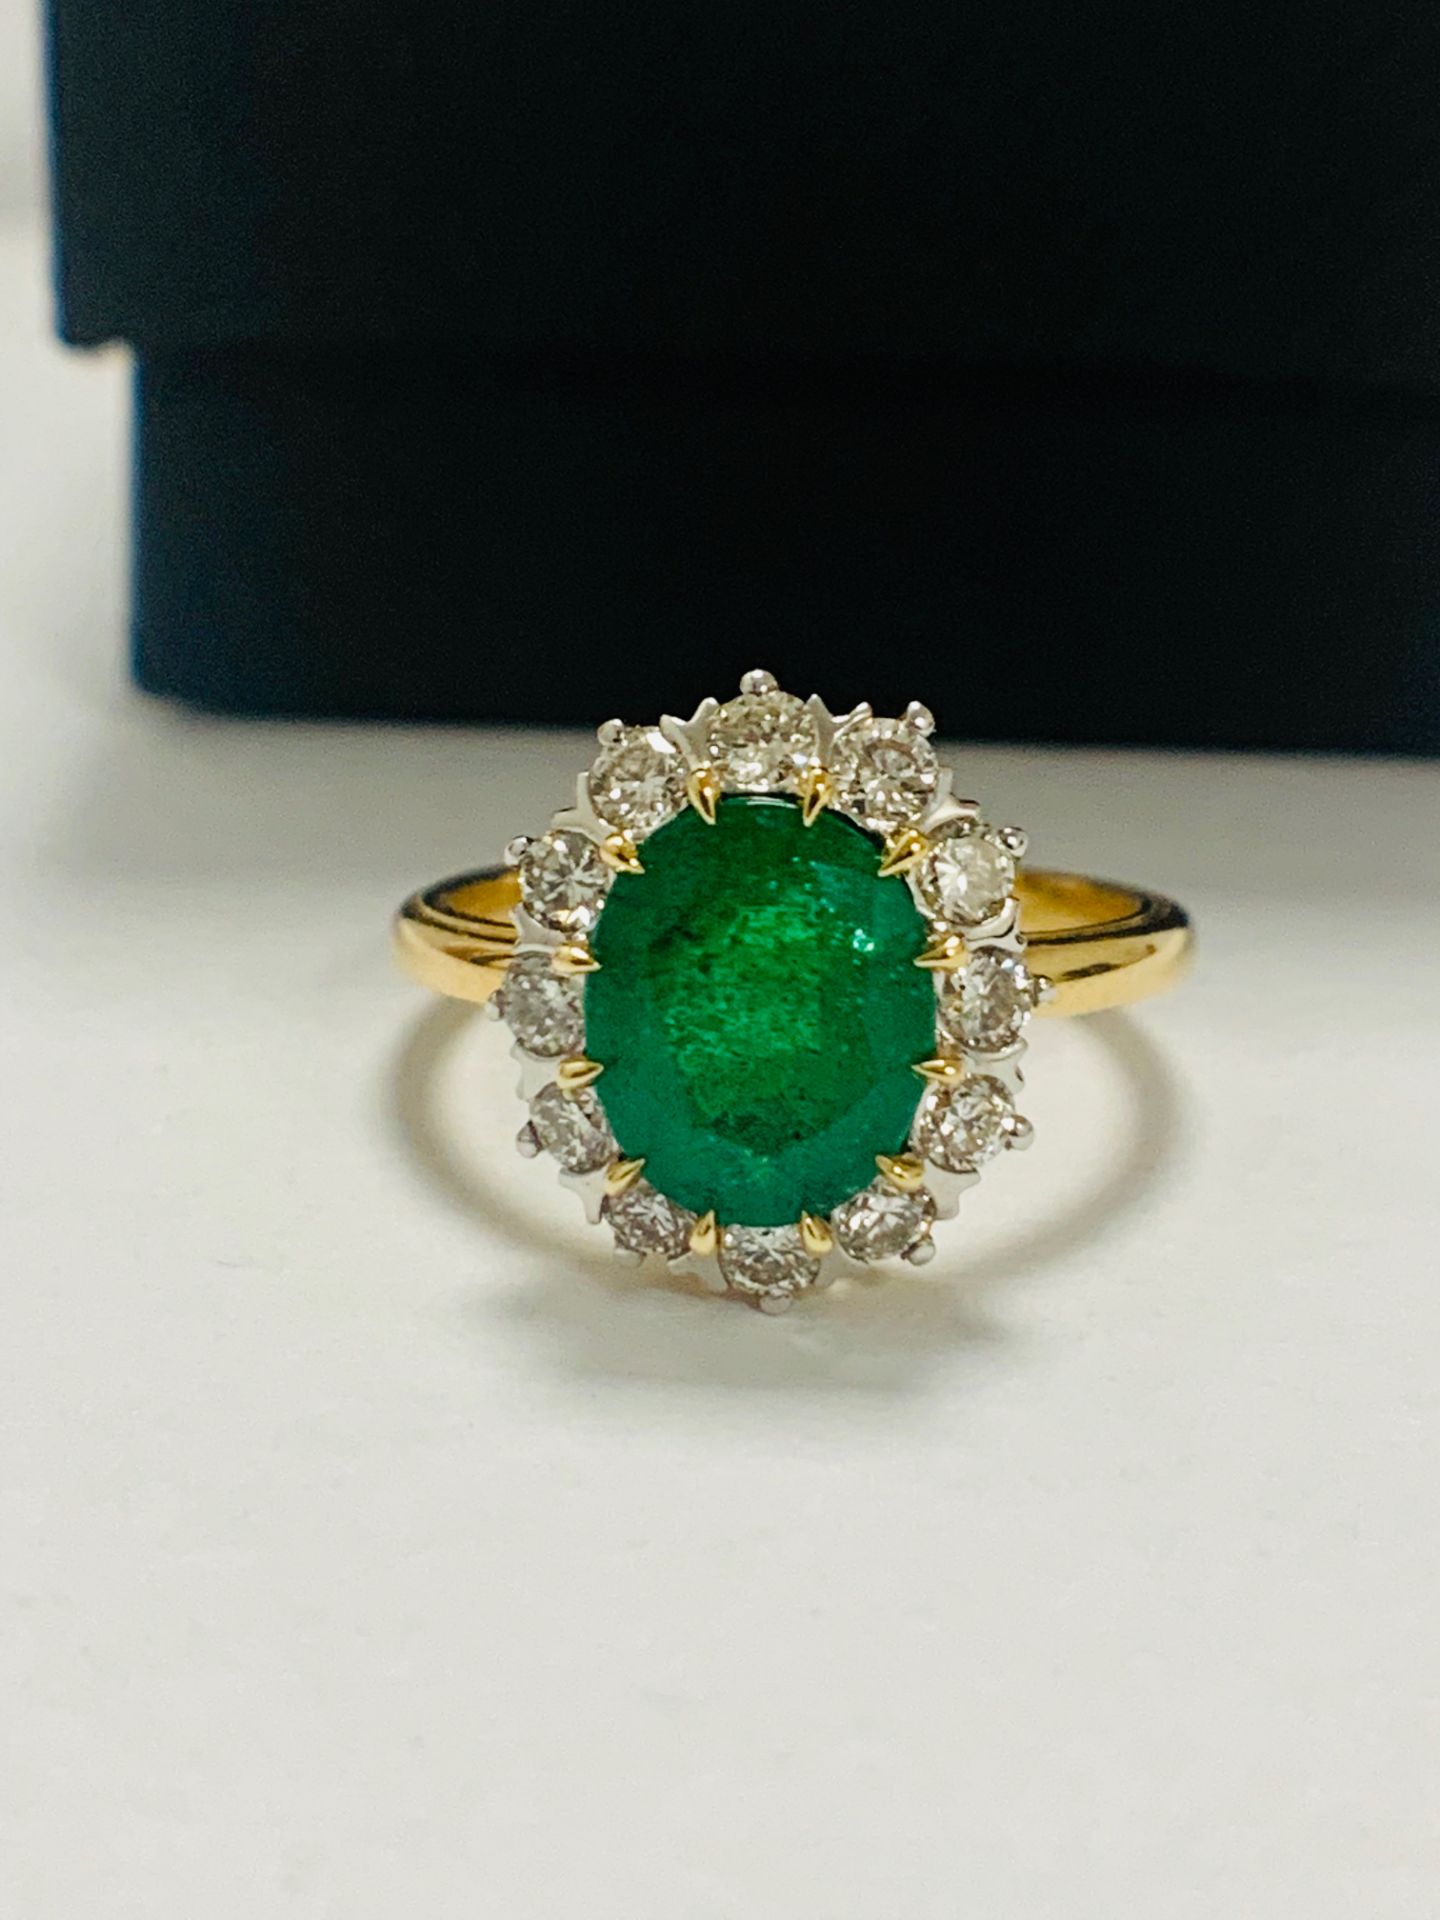 14ct Yellow Gold Emerald and Diamond Ring Featuring Centre, Oval Cut, Dark Green Emerald